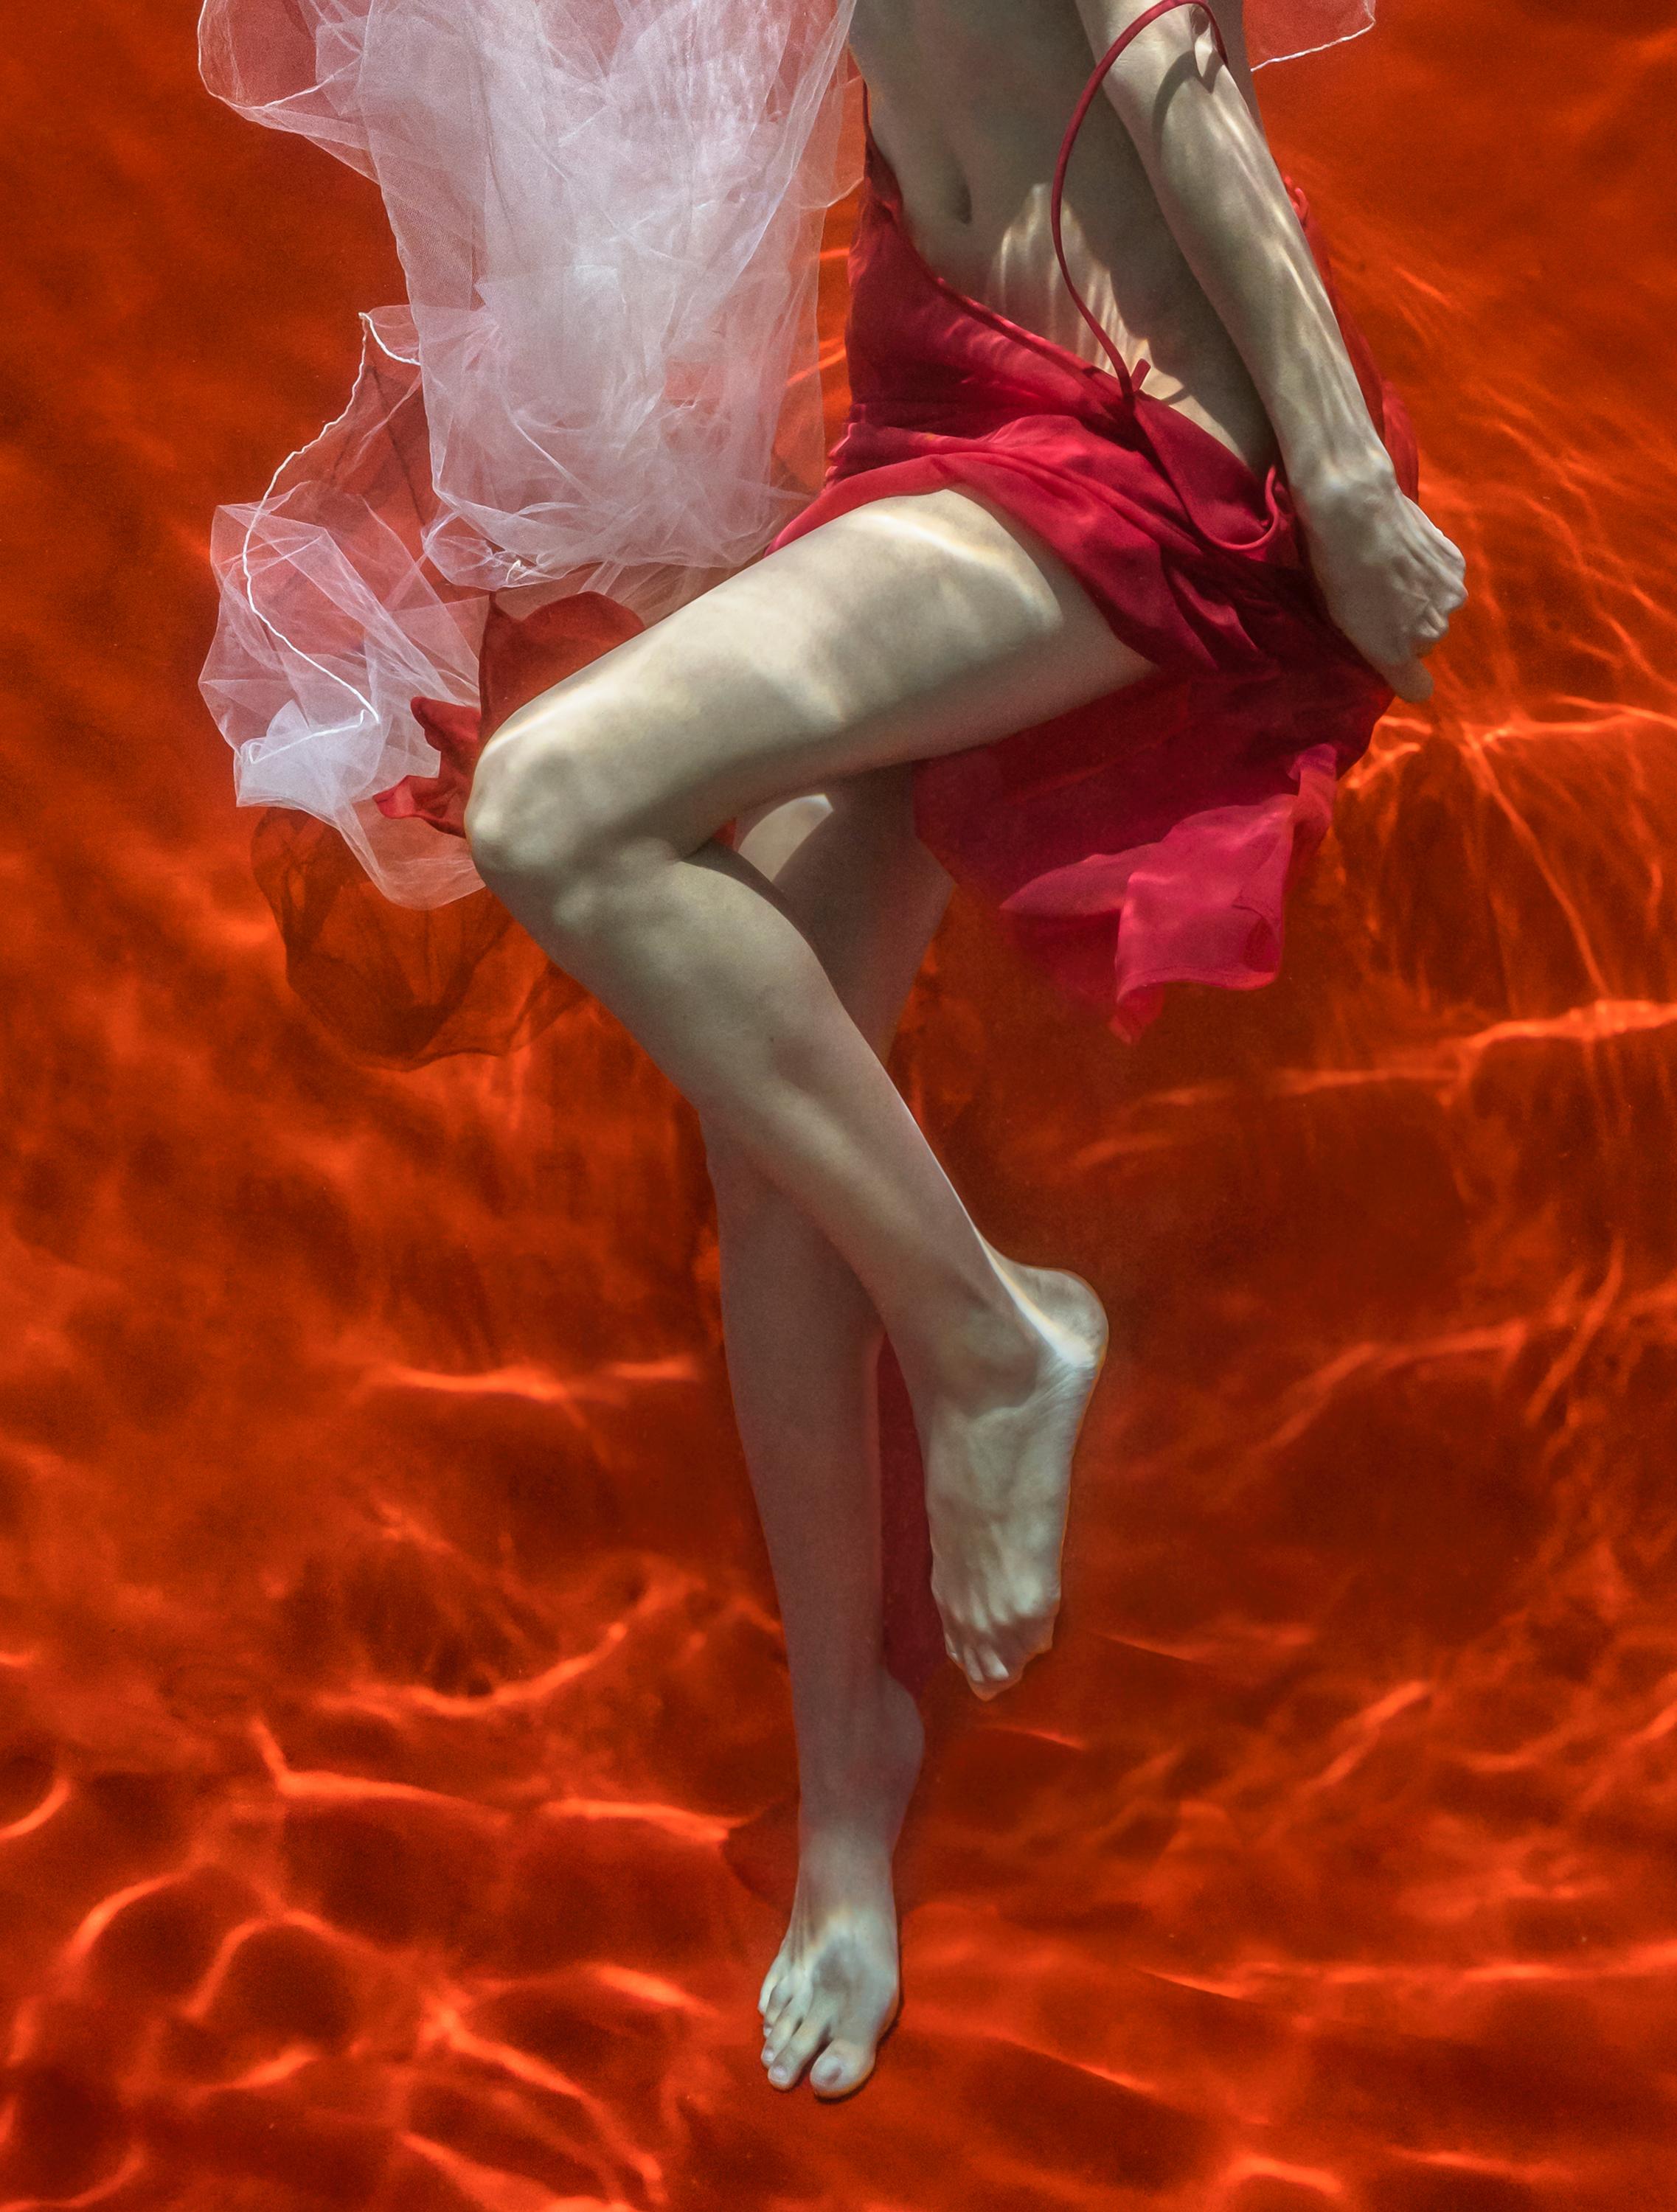 An underwater photograph of a topless young woman with white tulle scarf taking off her red skirt on bright red background. 

Original digital print on archival paper signed by the artist.
Limited edition of 24 
Paper size: 36x27